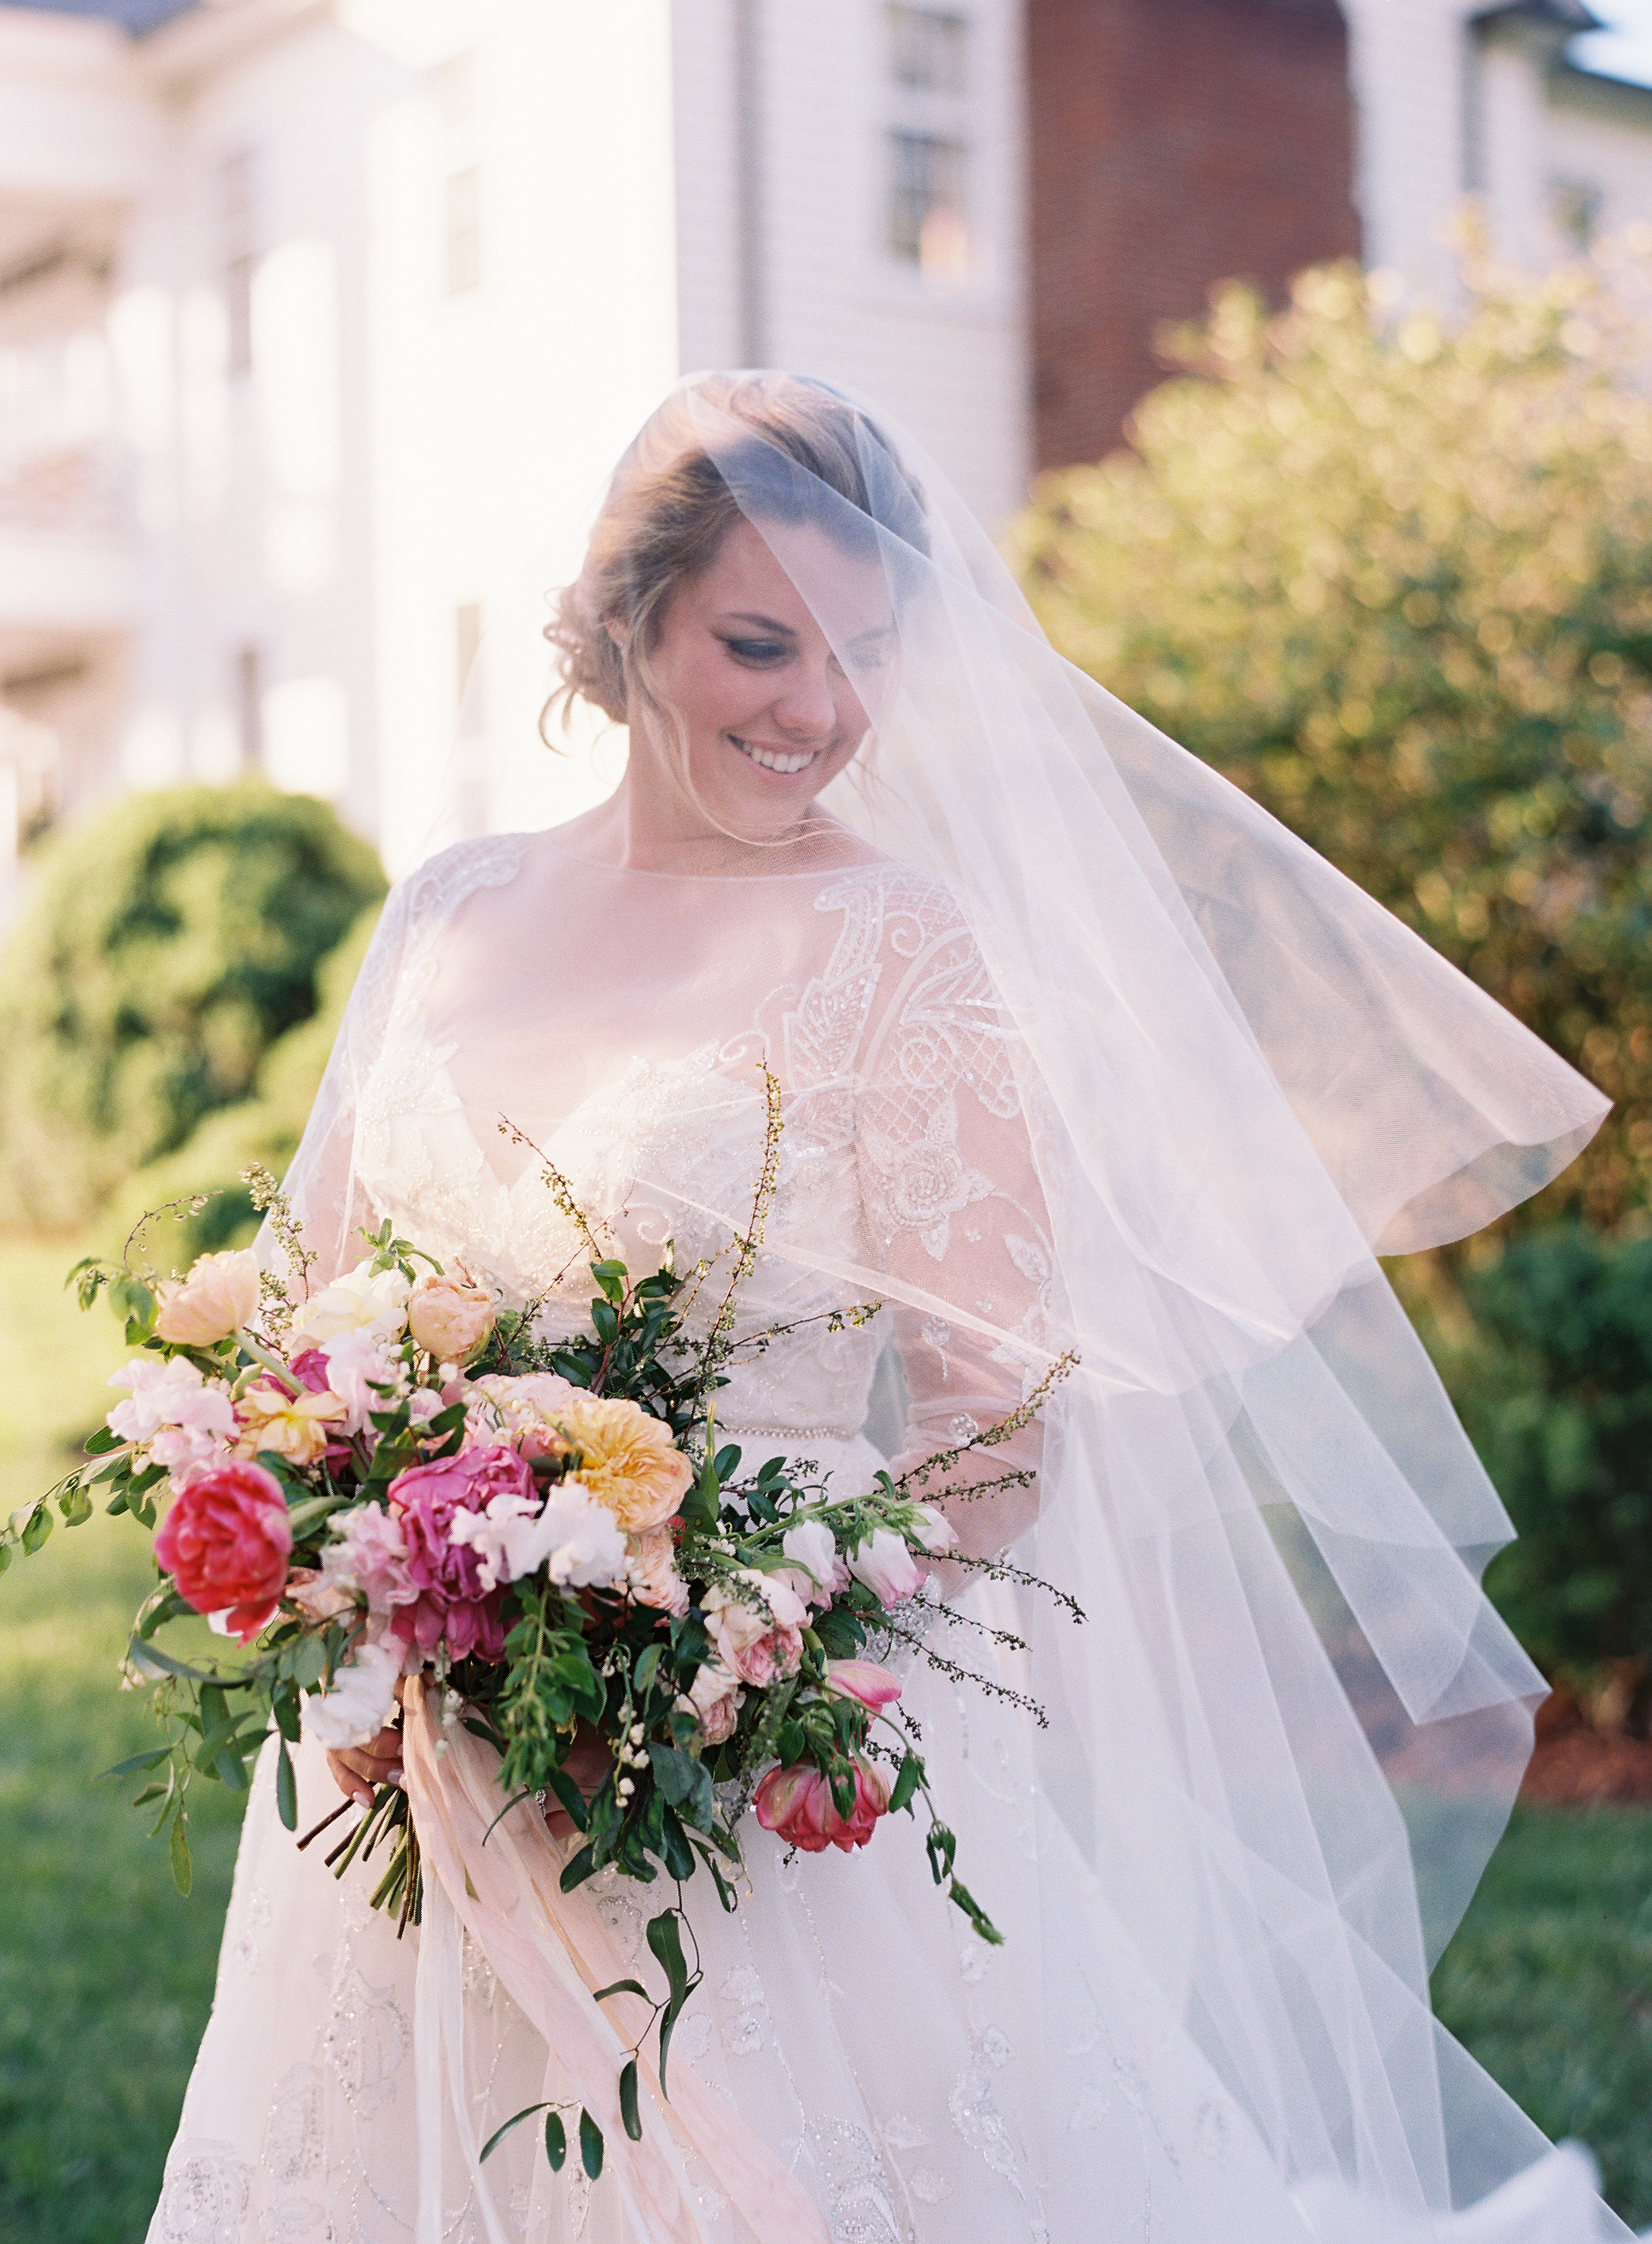 Organic bridal bouquet with blush sweet peas, homegrown pink peonies, California garden roses, and airy greenery // Nashville Wedding Floral Design